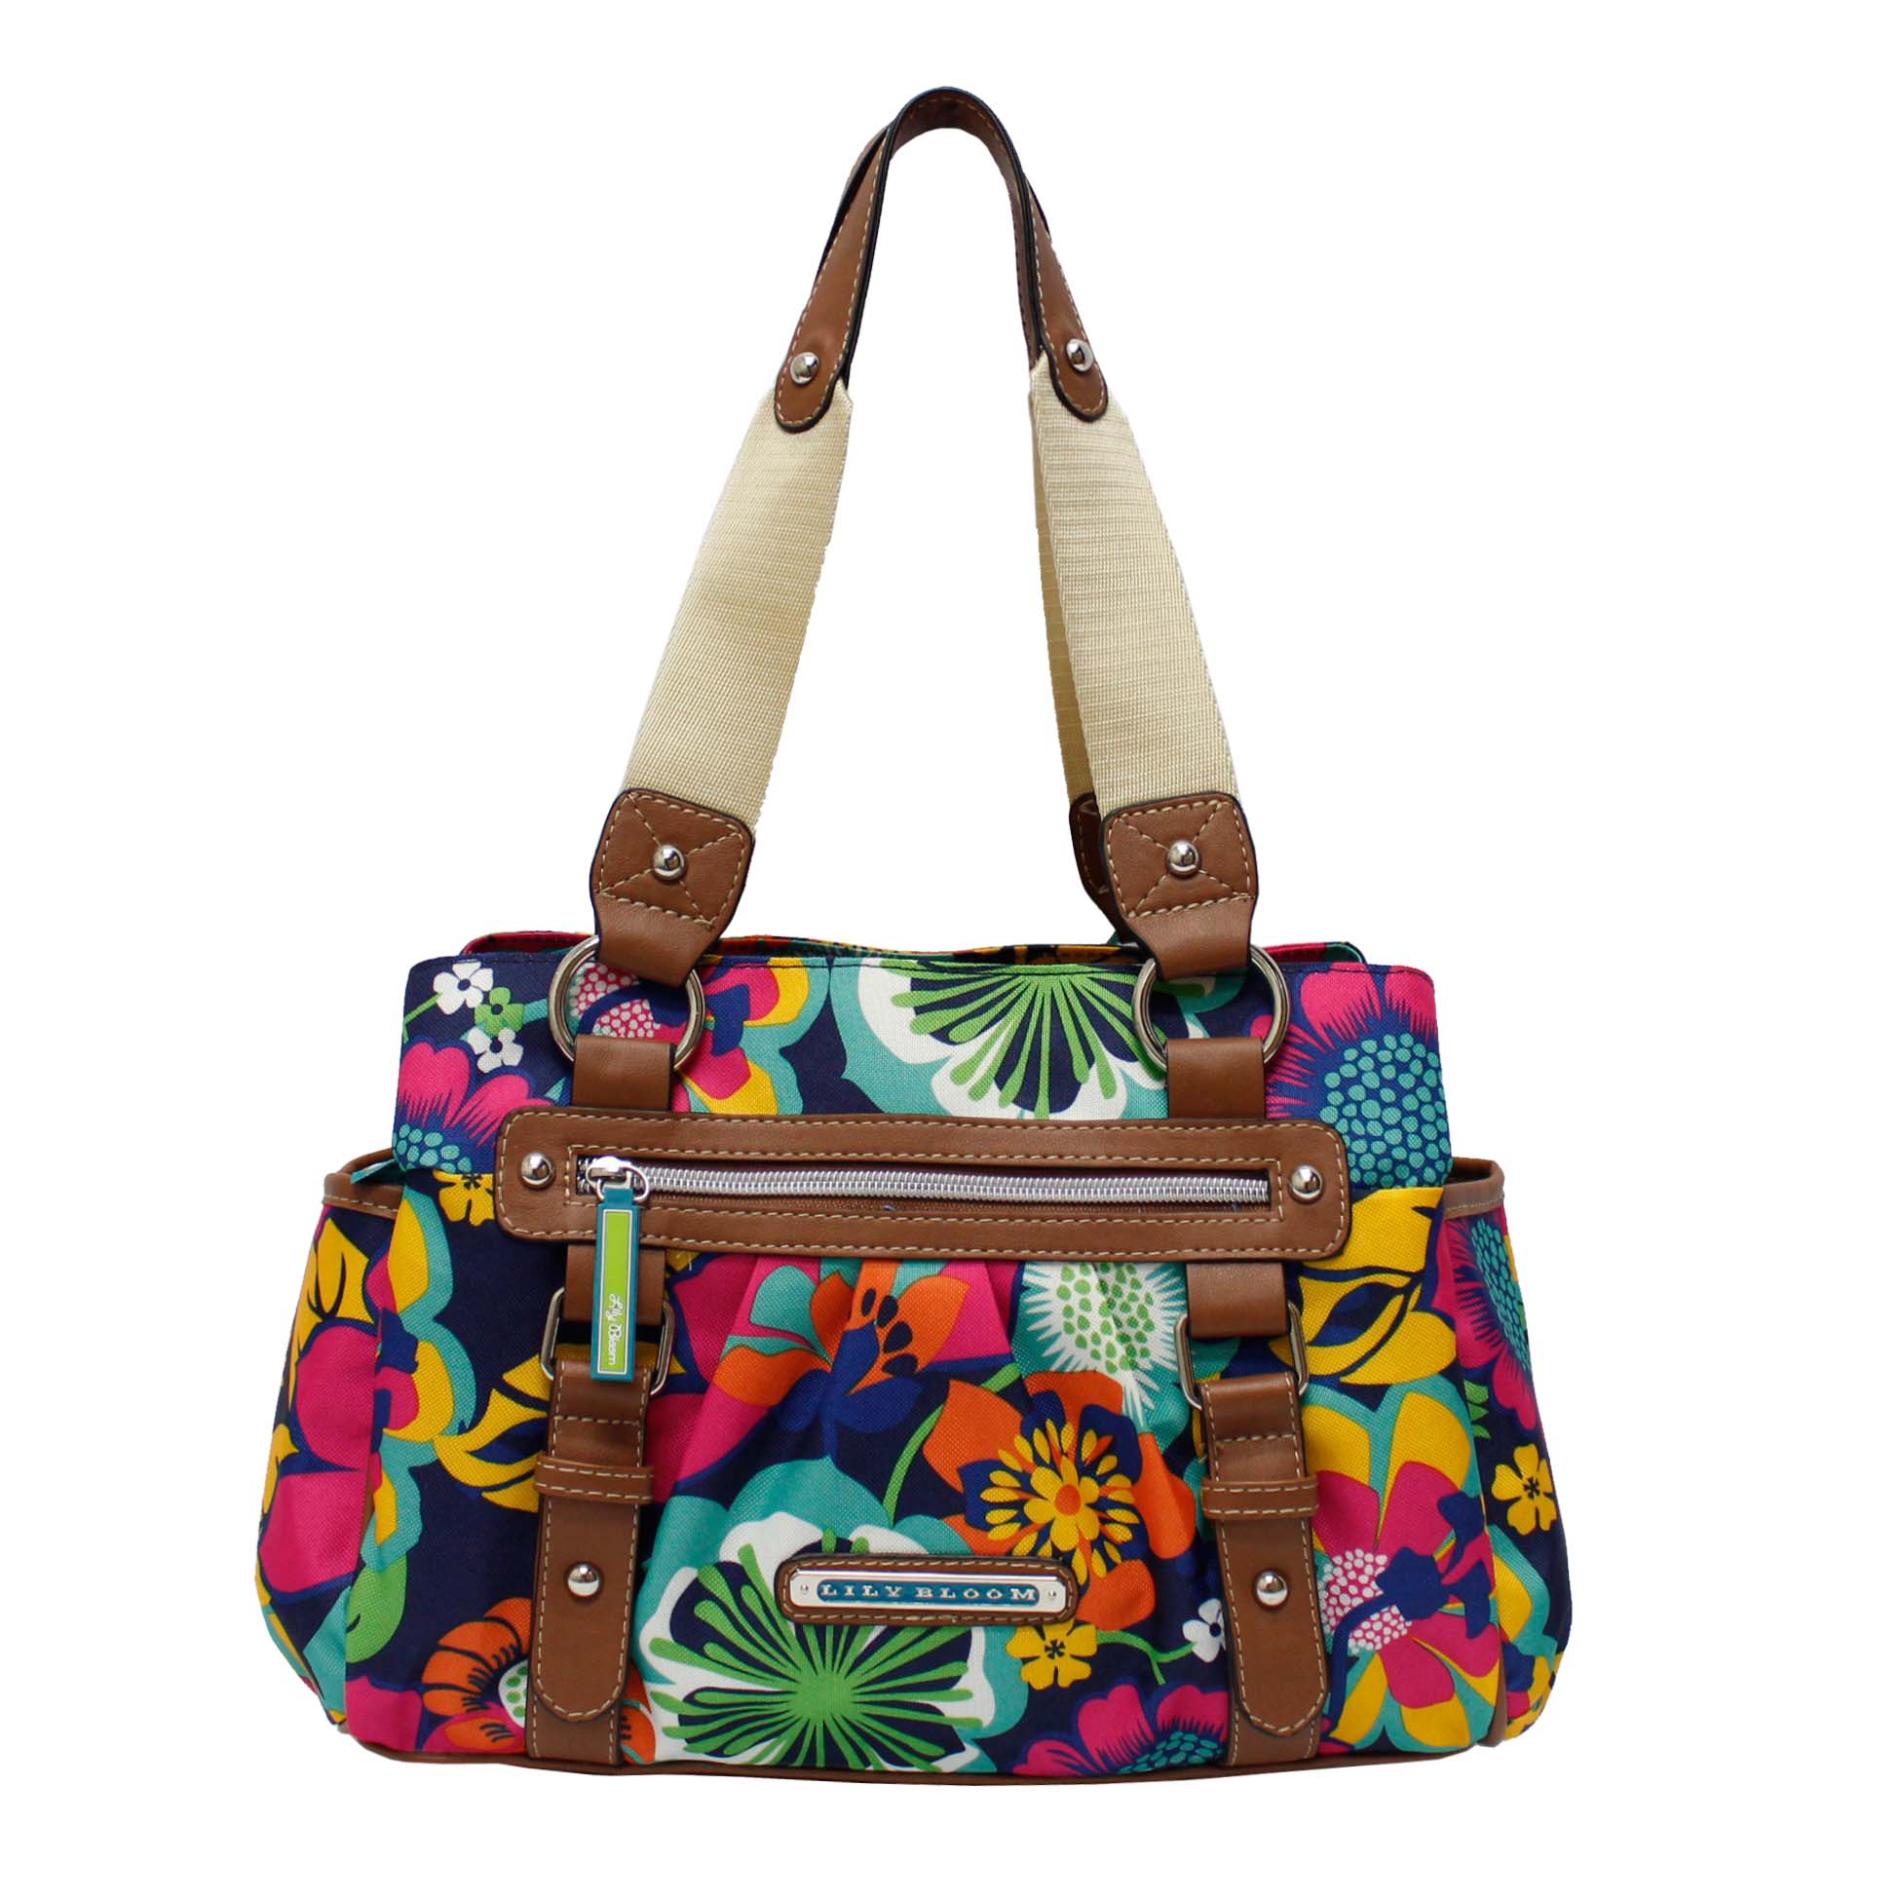 Lily Bloom Women's Triple-Section Handbag - Floral | Shop Your Way ...